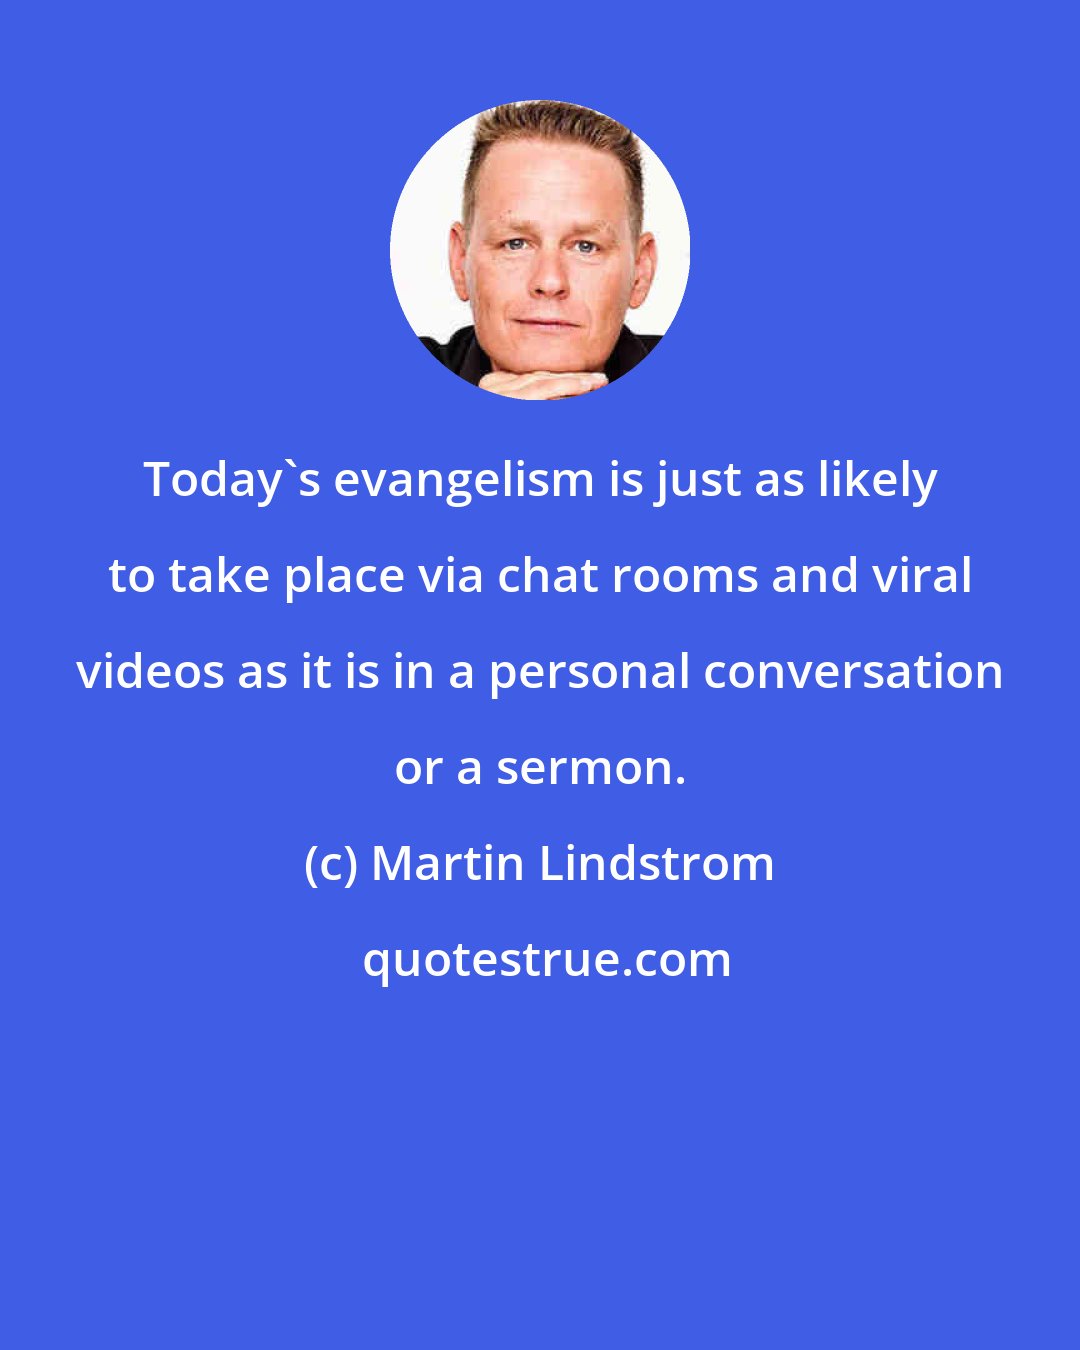 Martin Lindstrom: Today's evangelism is just as likely to take place via chat rooms and viral videos as it is in a personal conversation or a sermon.